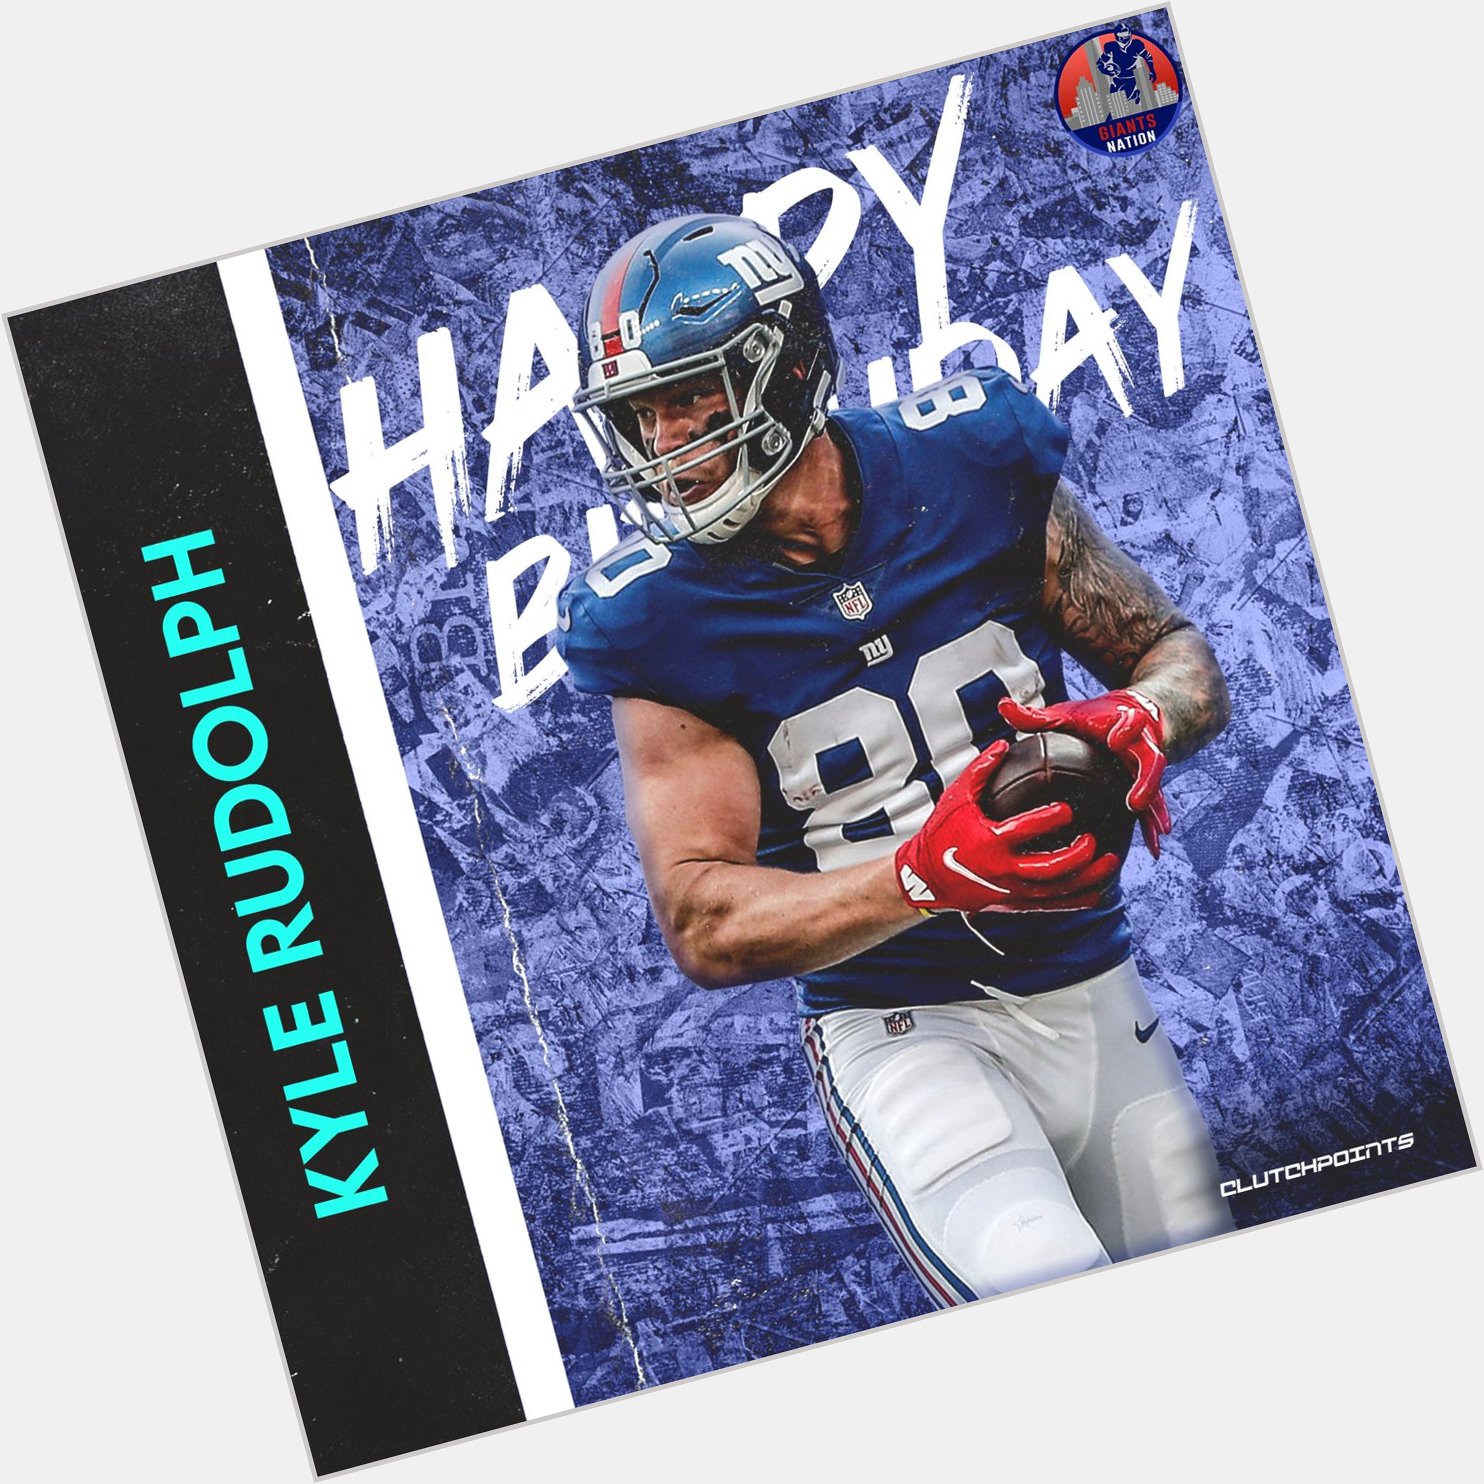 Join Giants Nation in greeting 2x Pro Bowler, Kyle Rudolph, a happy 32nd birthday! 